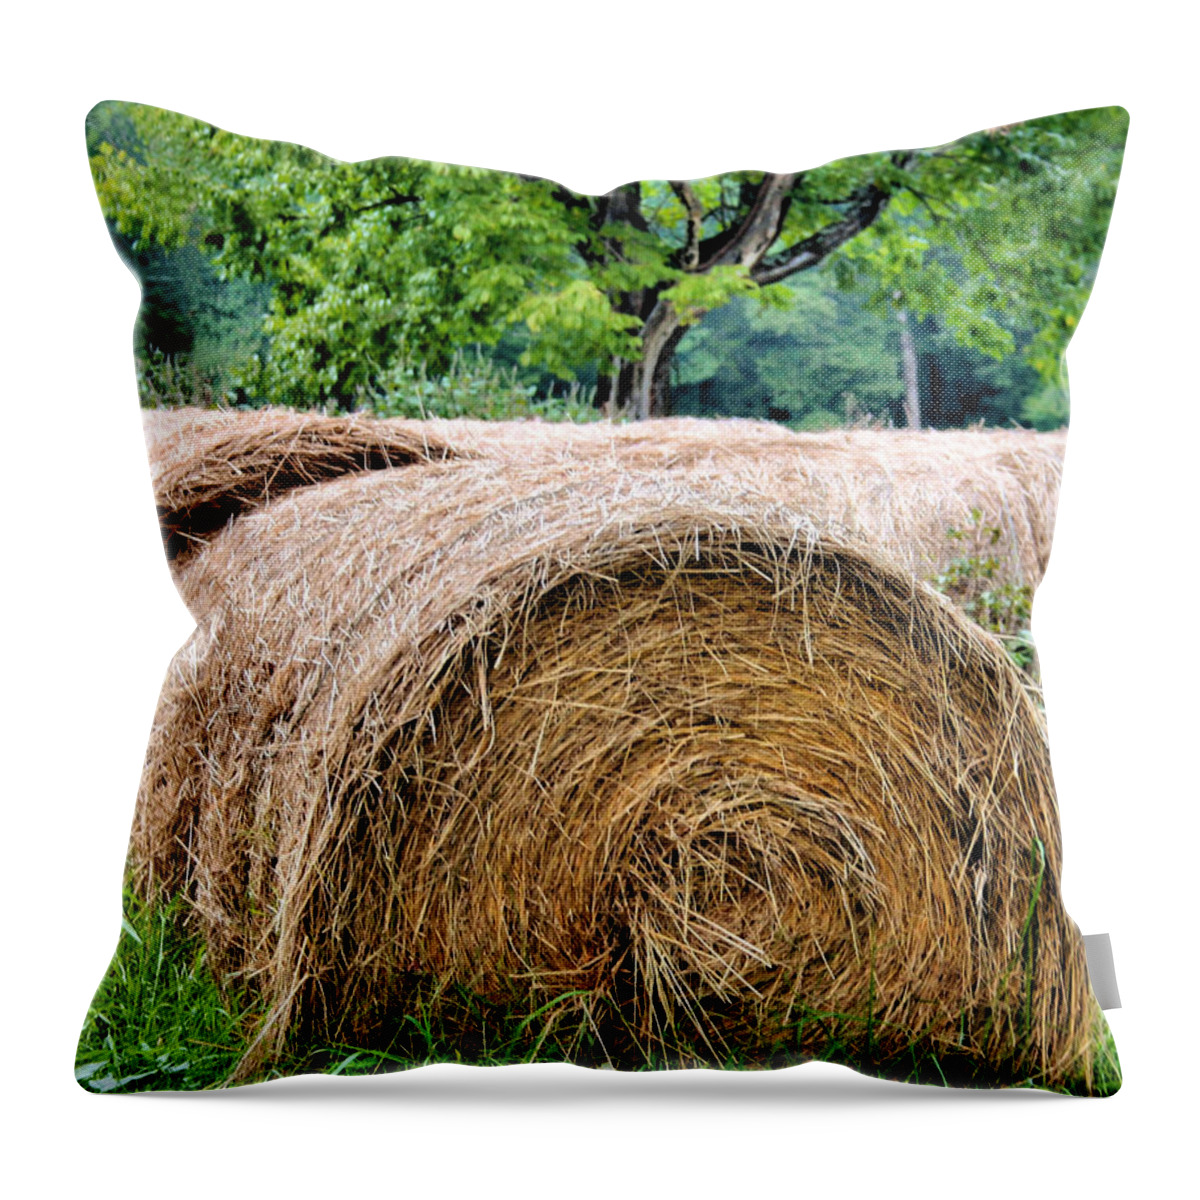 Hay Throw Pillow featuring the photograph Hay Rolls by Kristin Elmquist